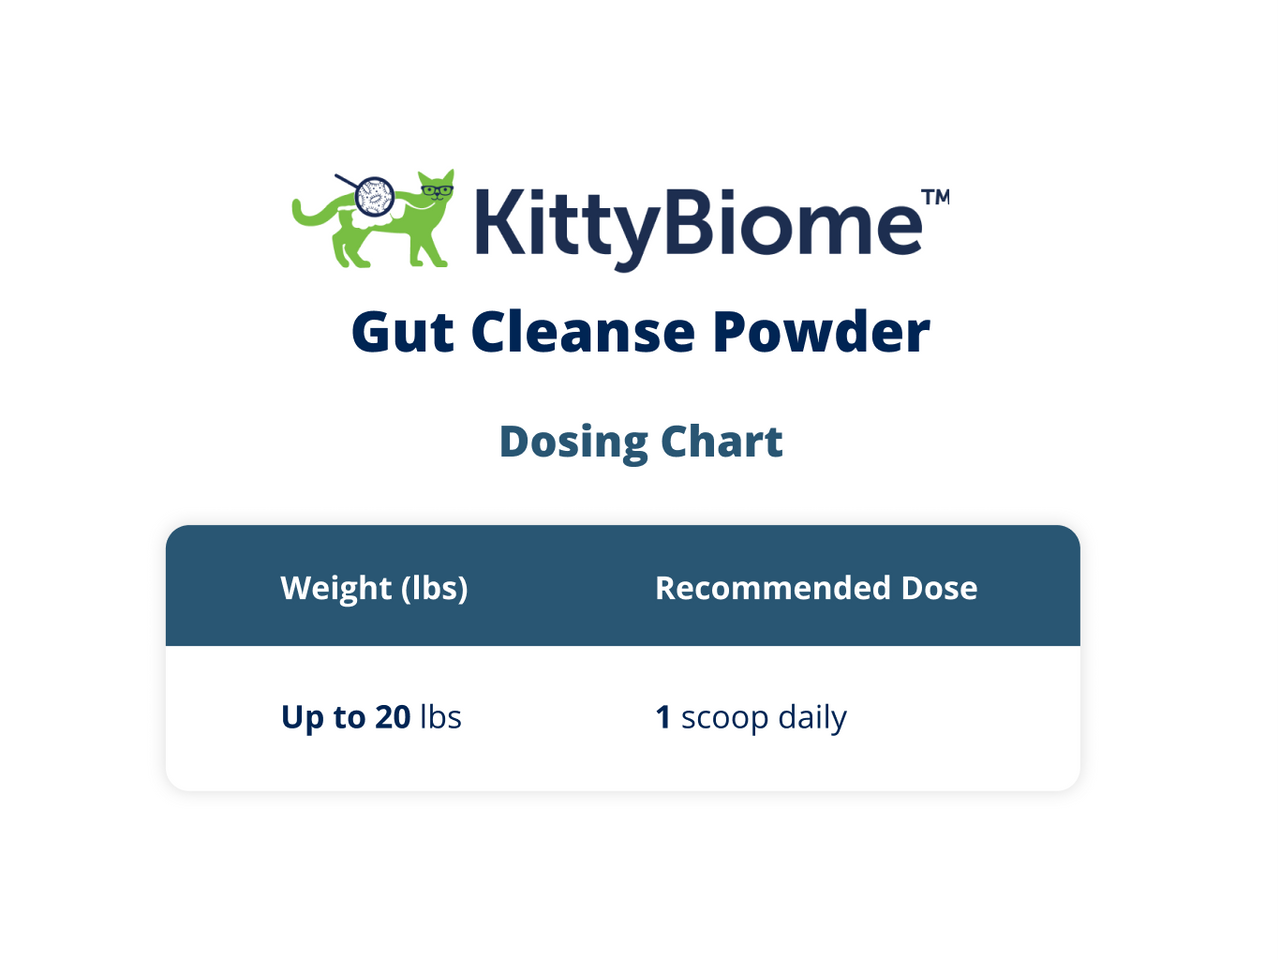 KittyBiome™ Gut Cleanse Powder